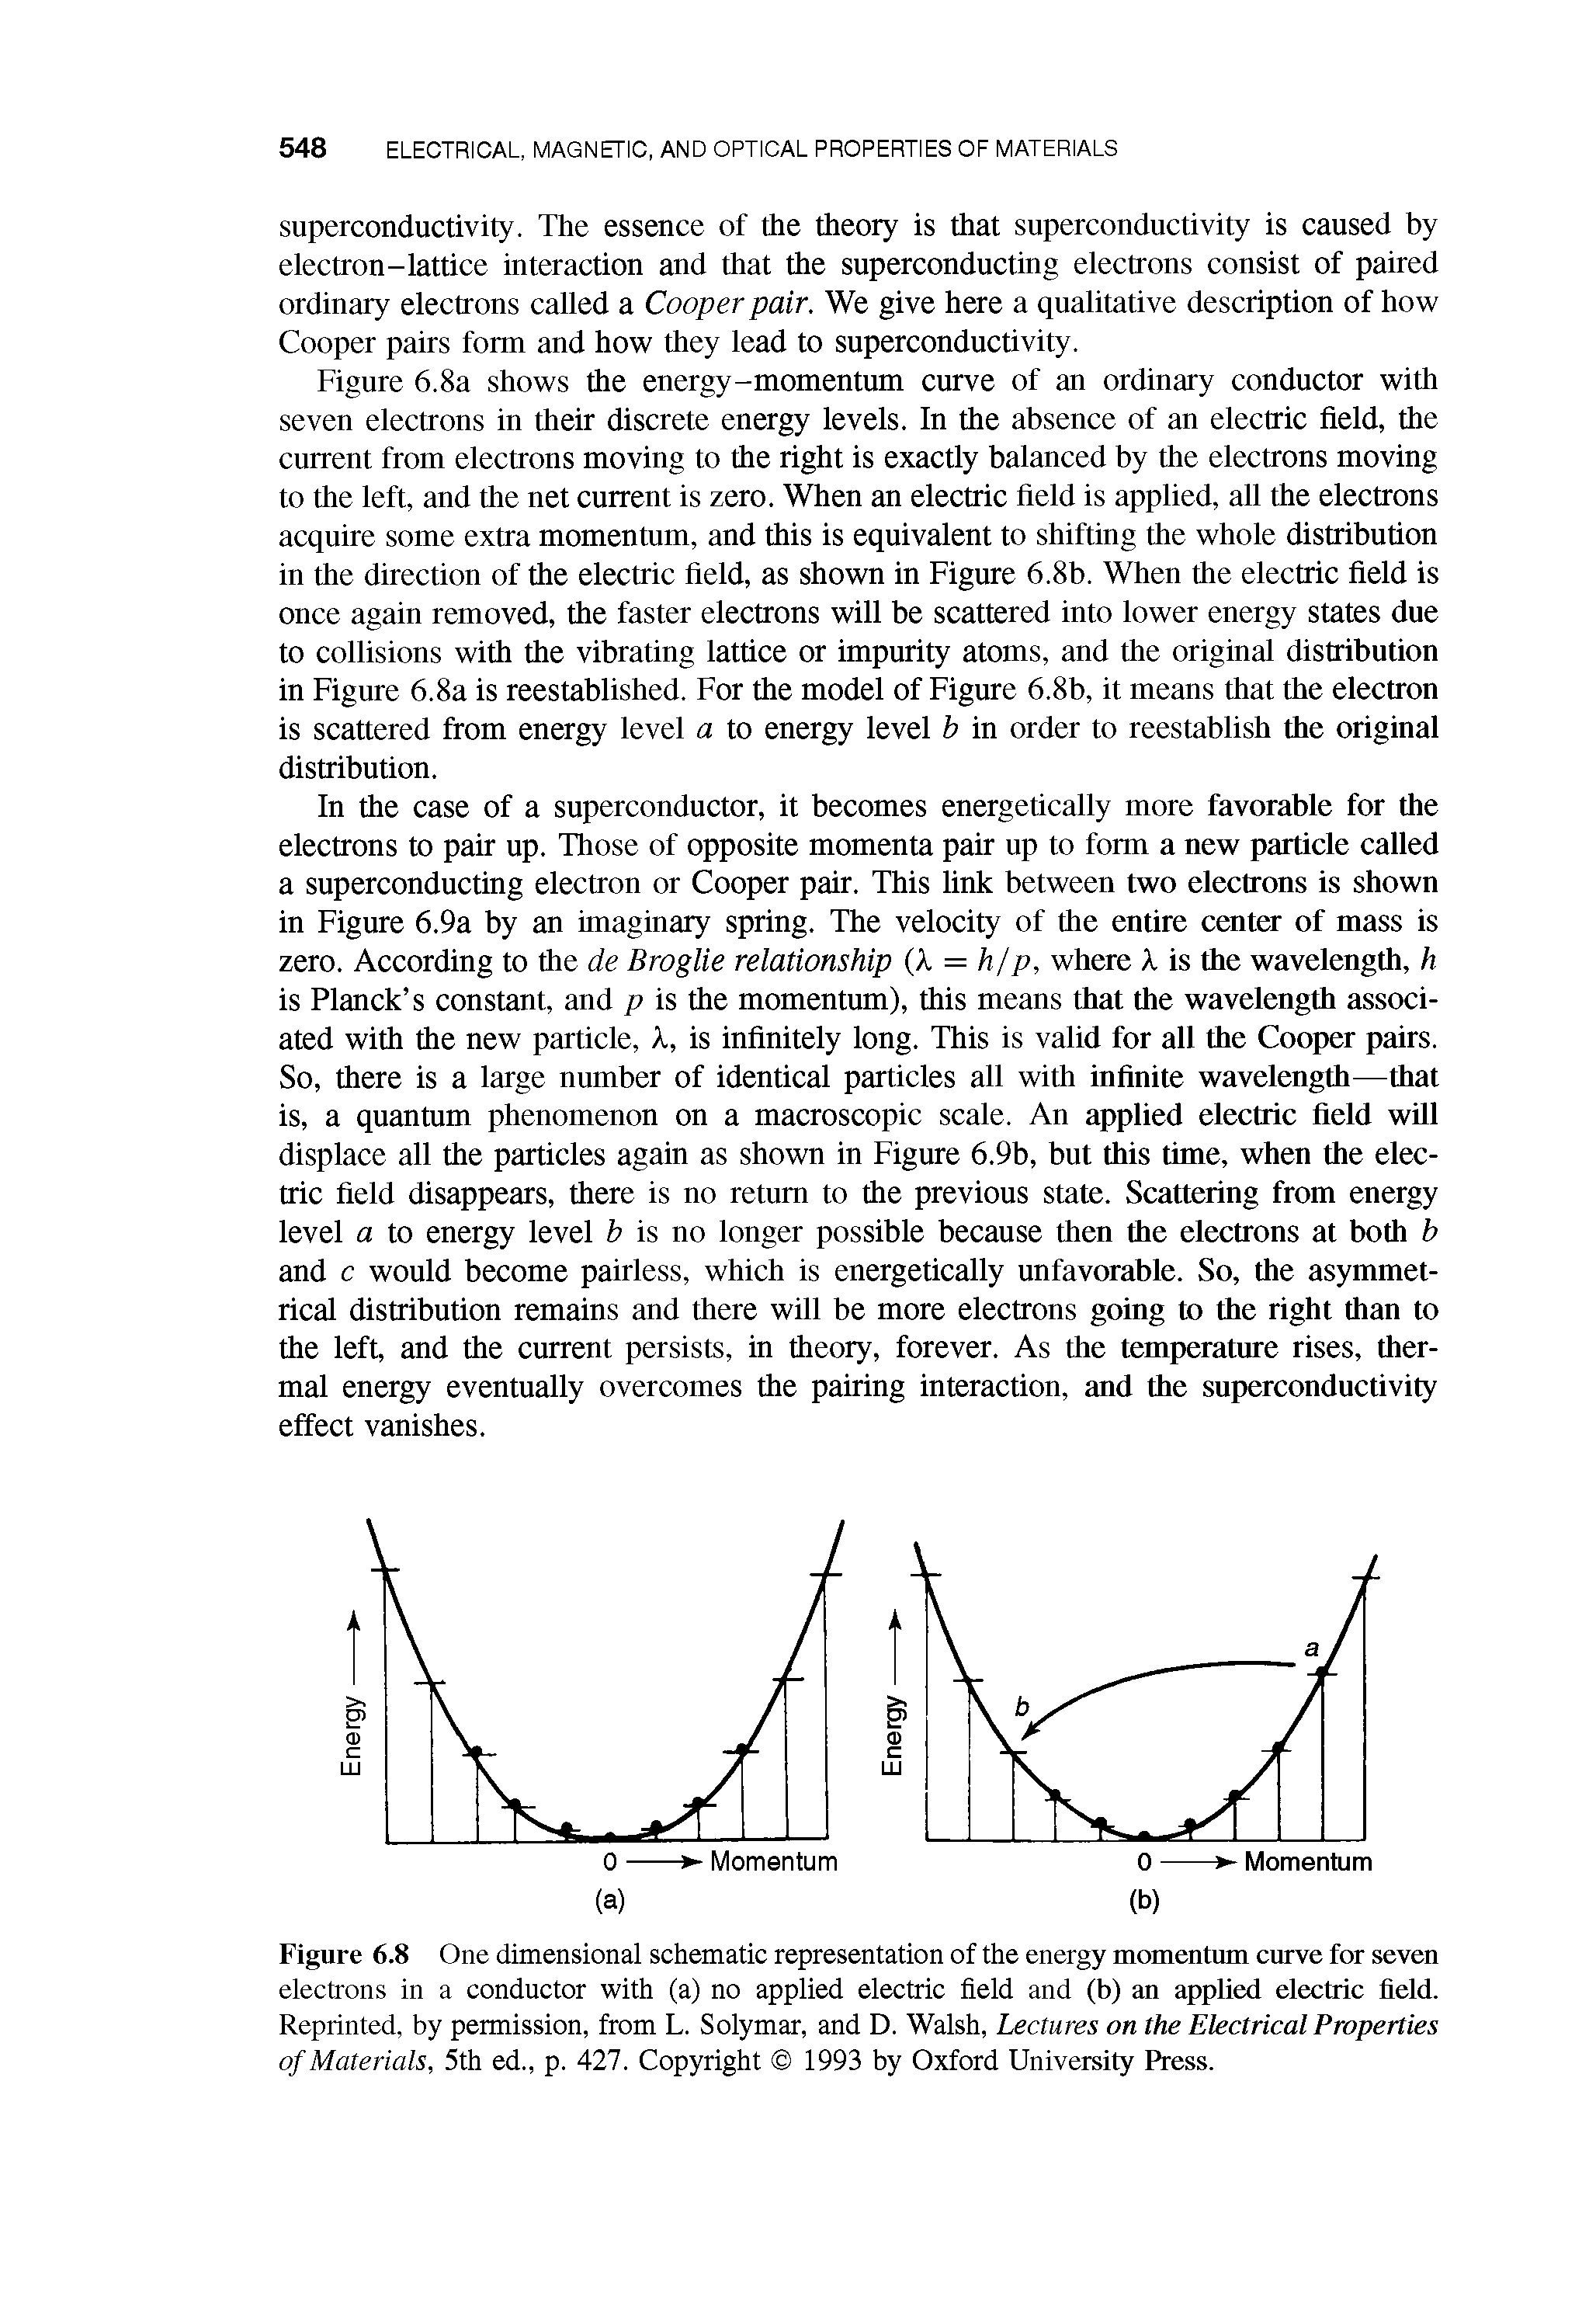 Figure 6.8 One dimensional schematic representation of the energy momentum curve for seven electrons in a conductor with (a) no applied electric field and (b) an applied electric field. Reprinted, by permission, from L. Solymar, and D. Walsh, Lectures on the Electrical Properties of Materials, 5th ed., p. 427. Copyright 1993 by Oxford University Press.